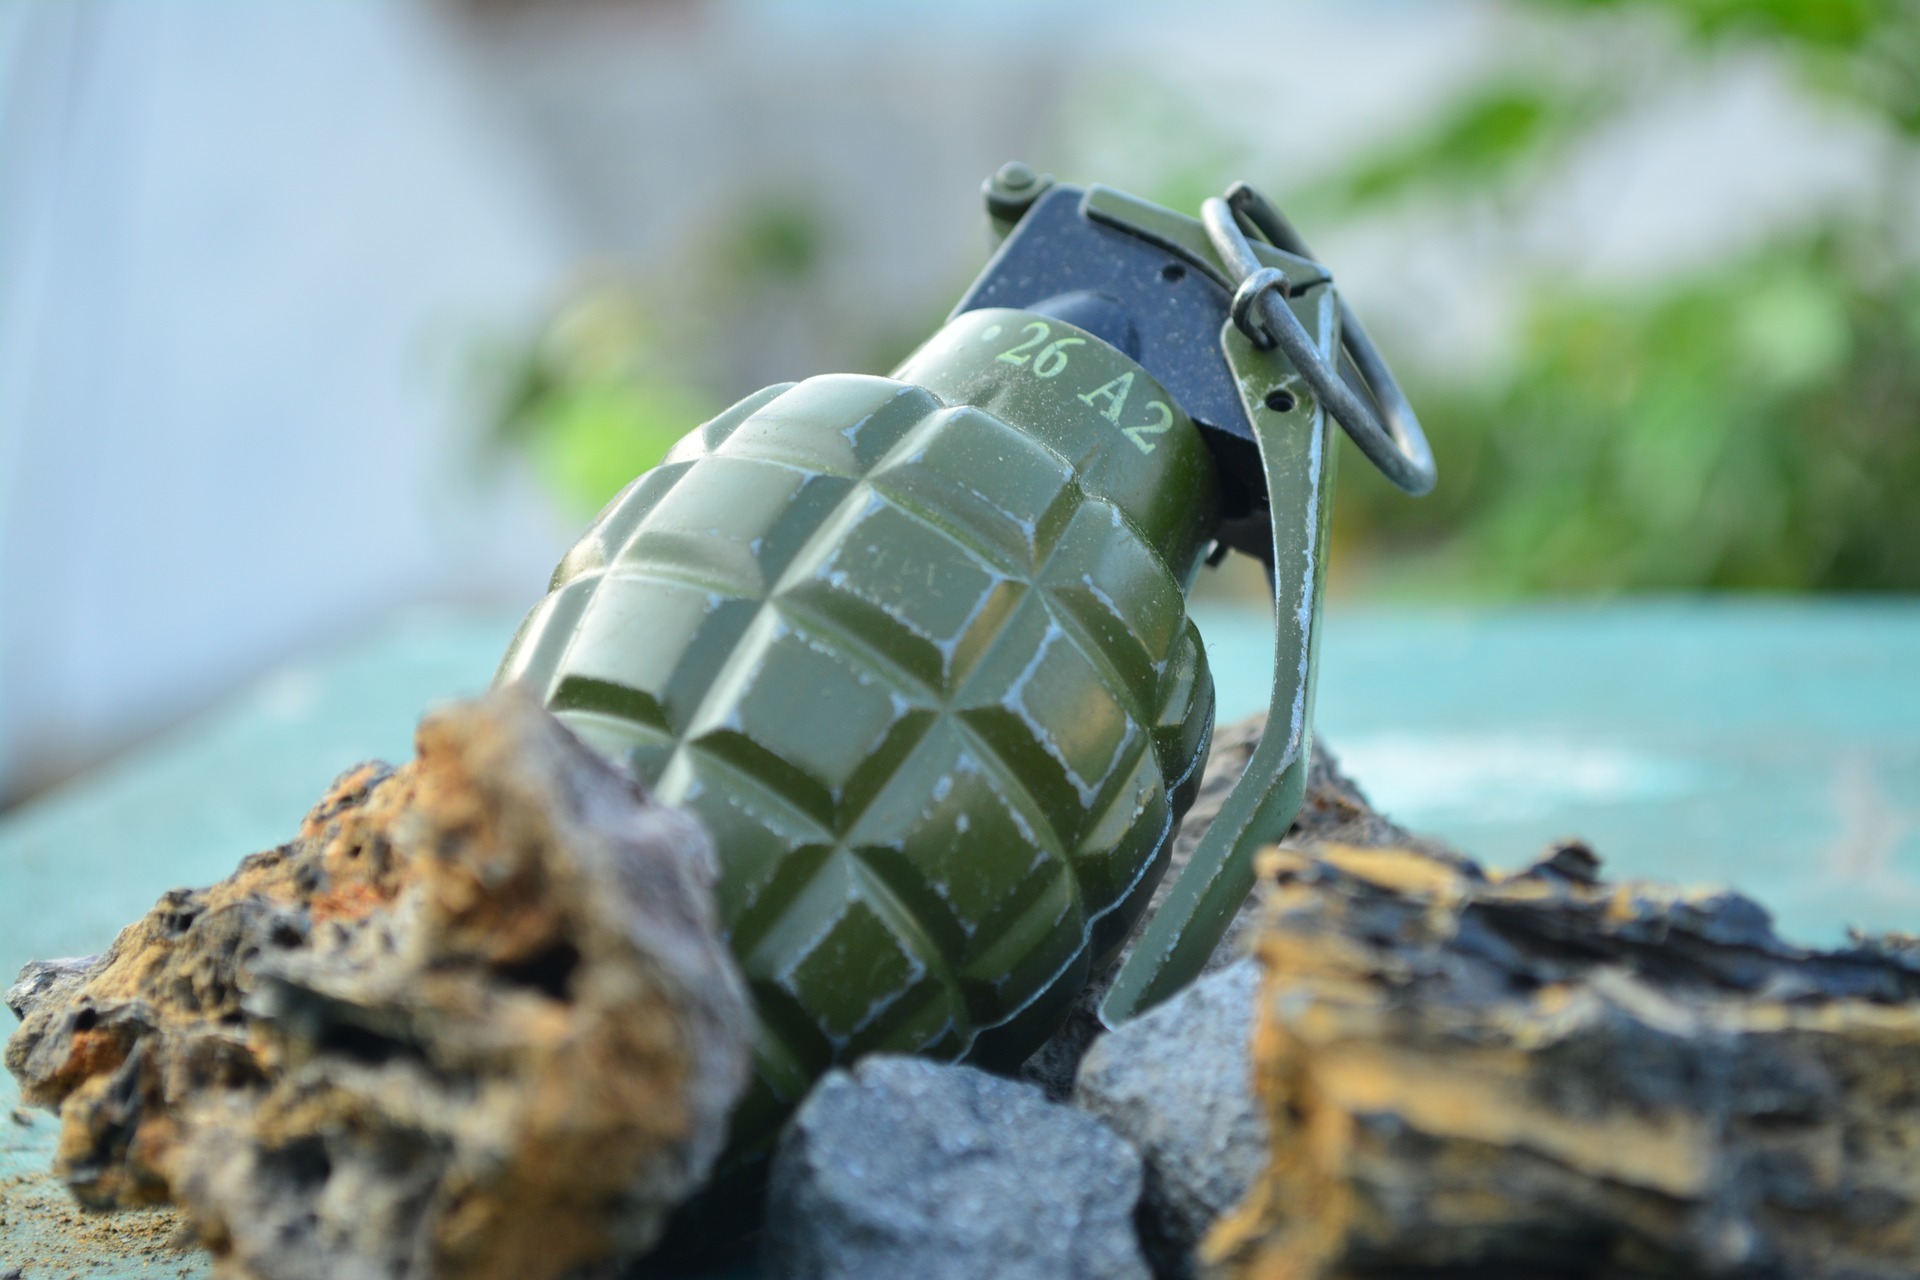 A stock image of a grenade. Credit: Pixabay